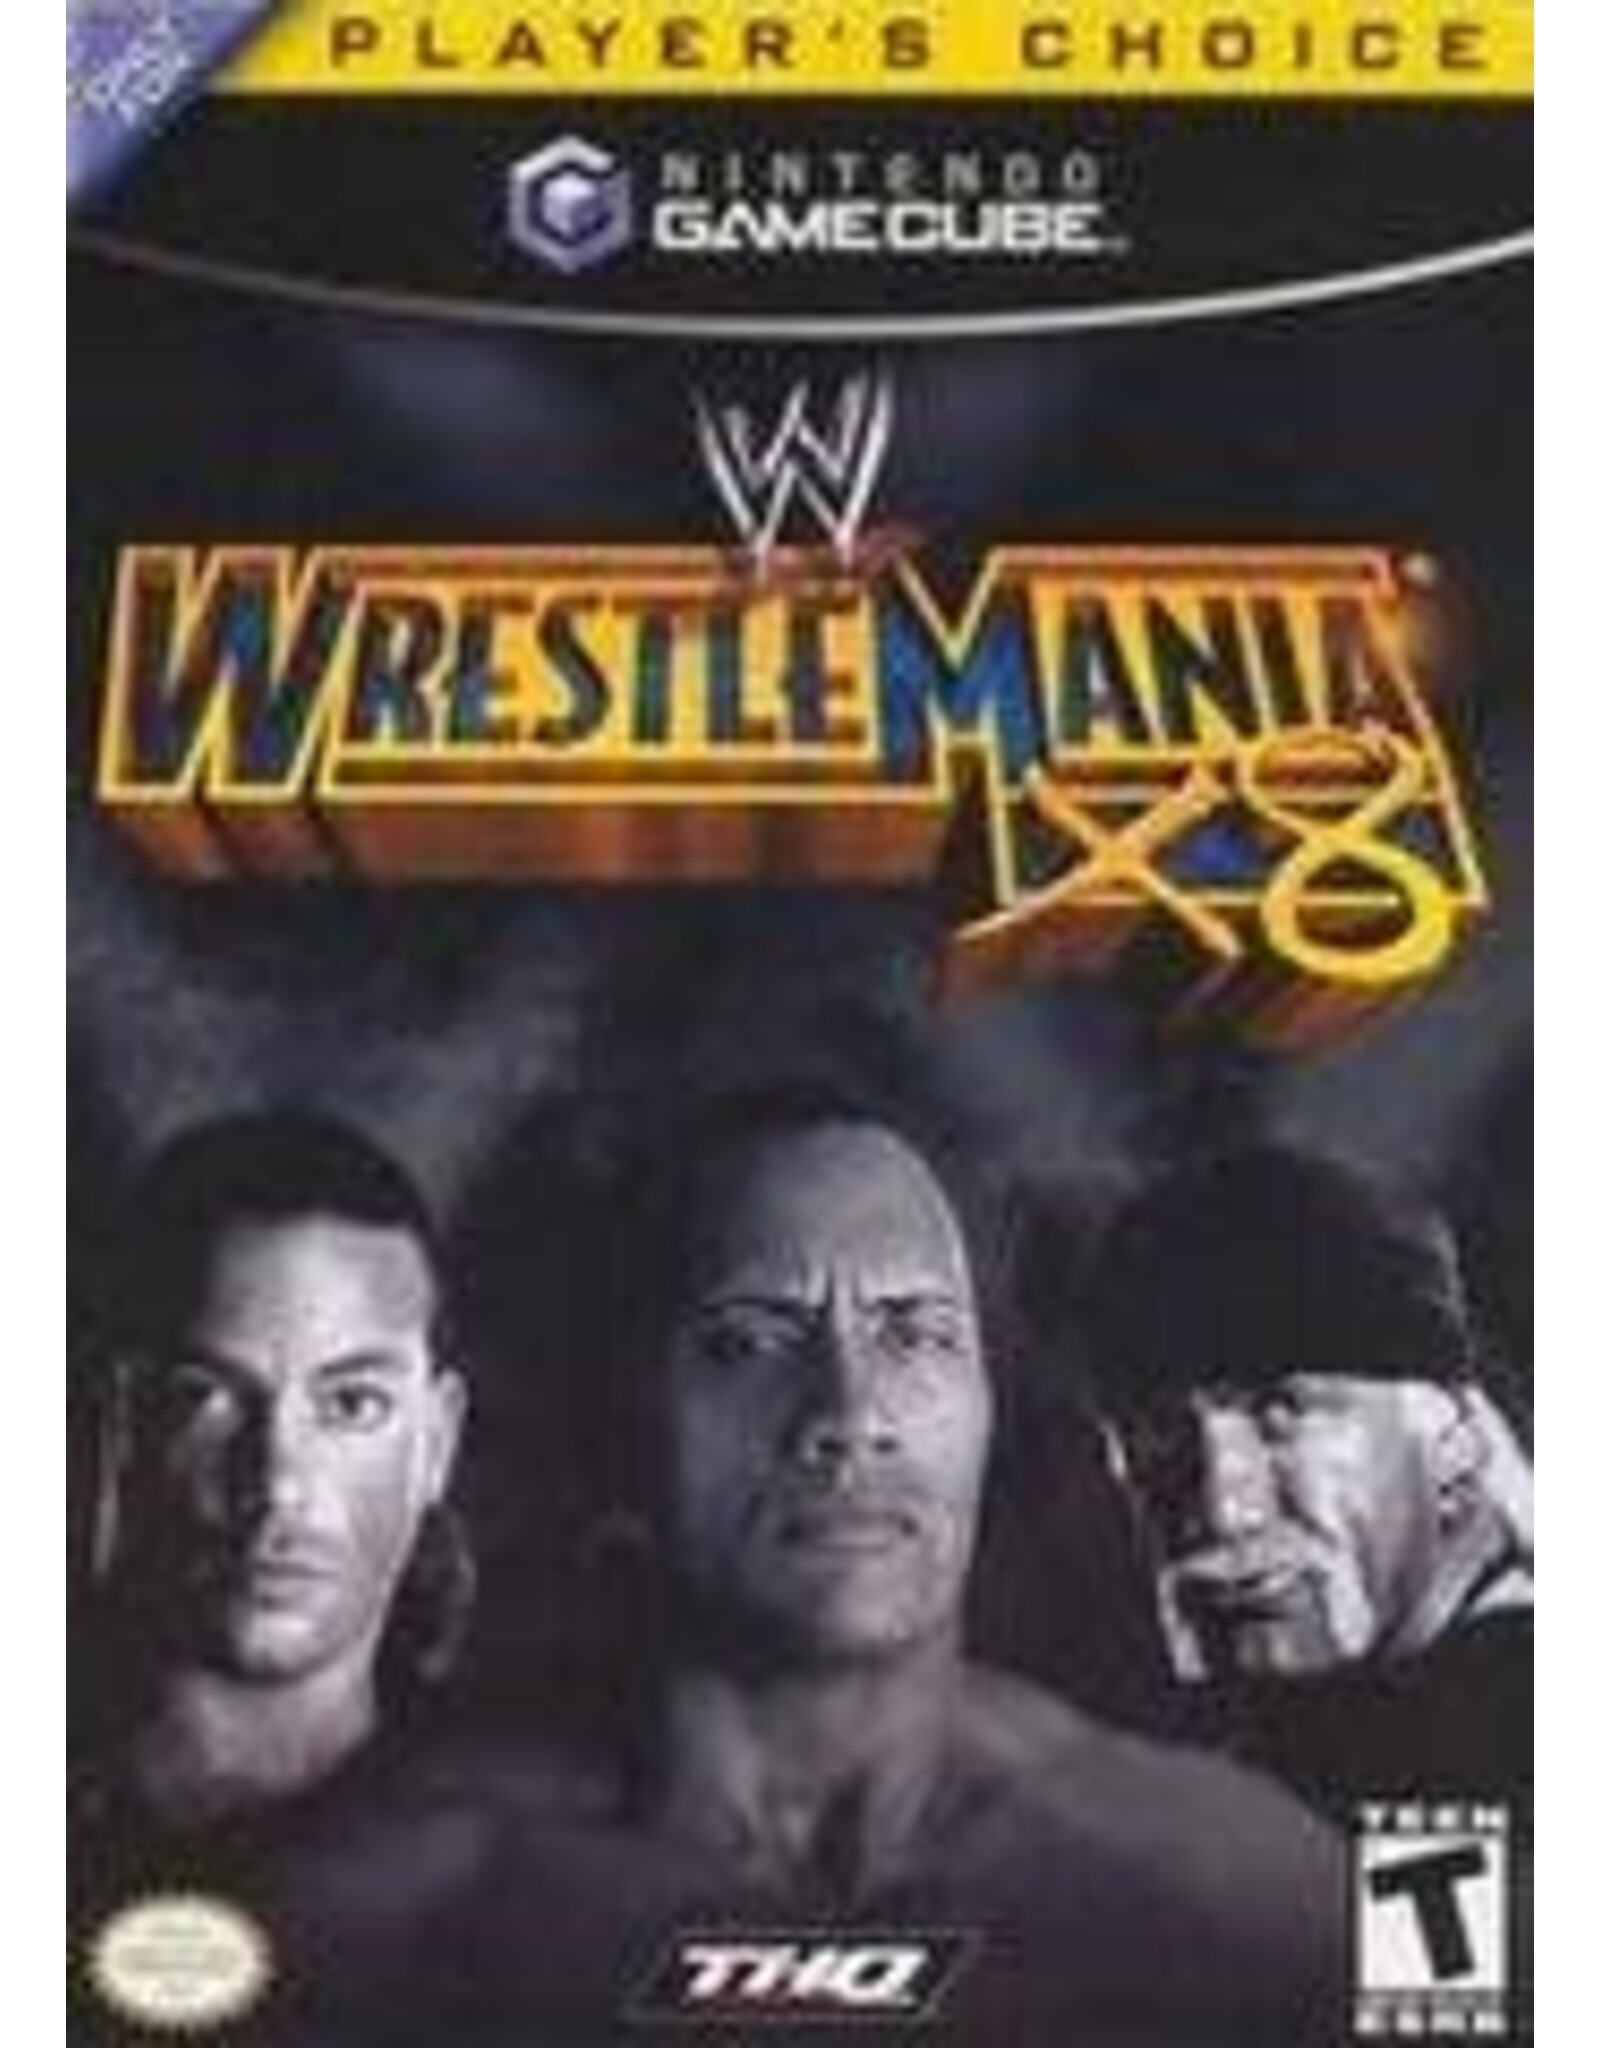 Gamecube WWE Wrestlemania X8 (CiB, Label Damage - Does not affect play)